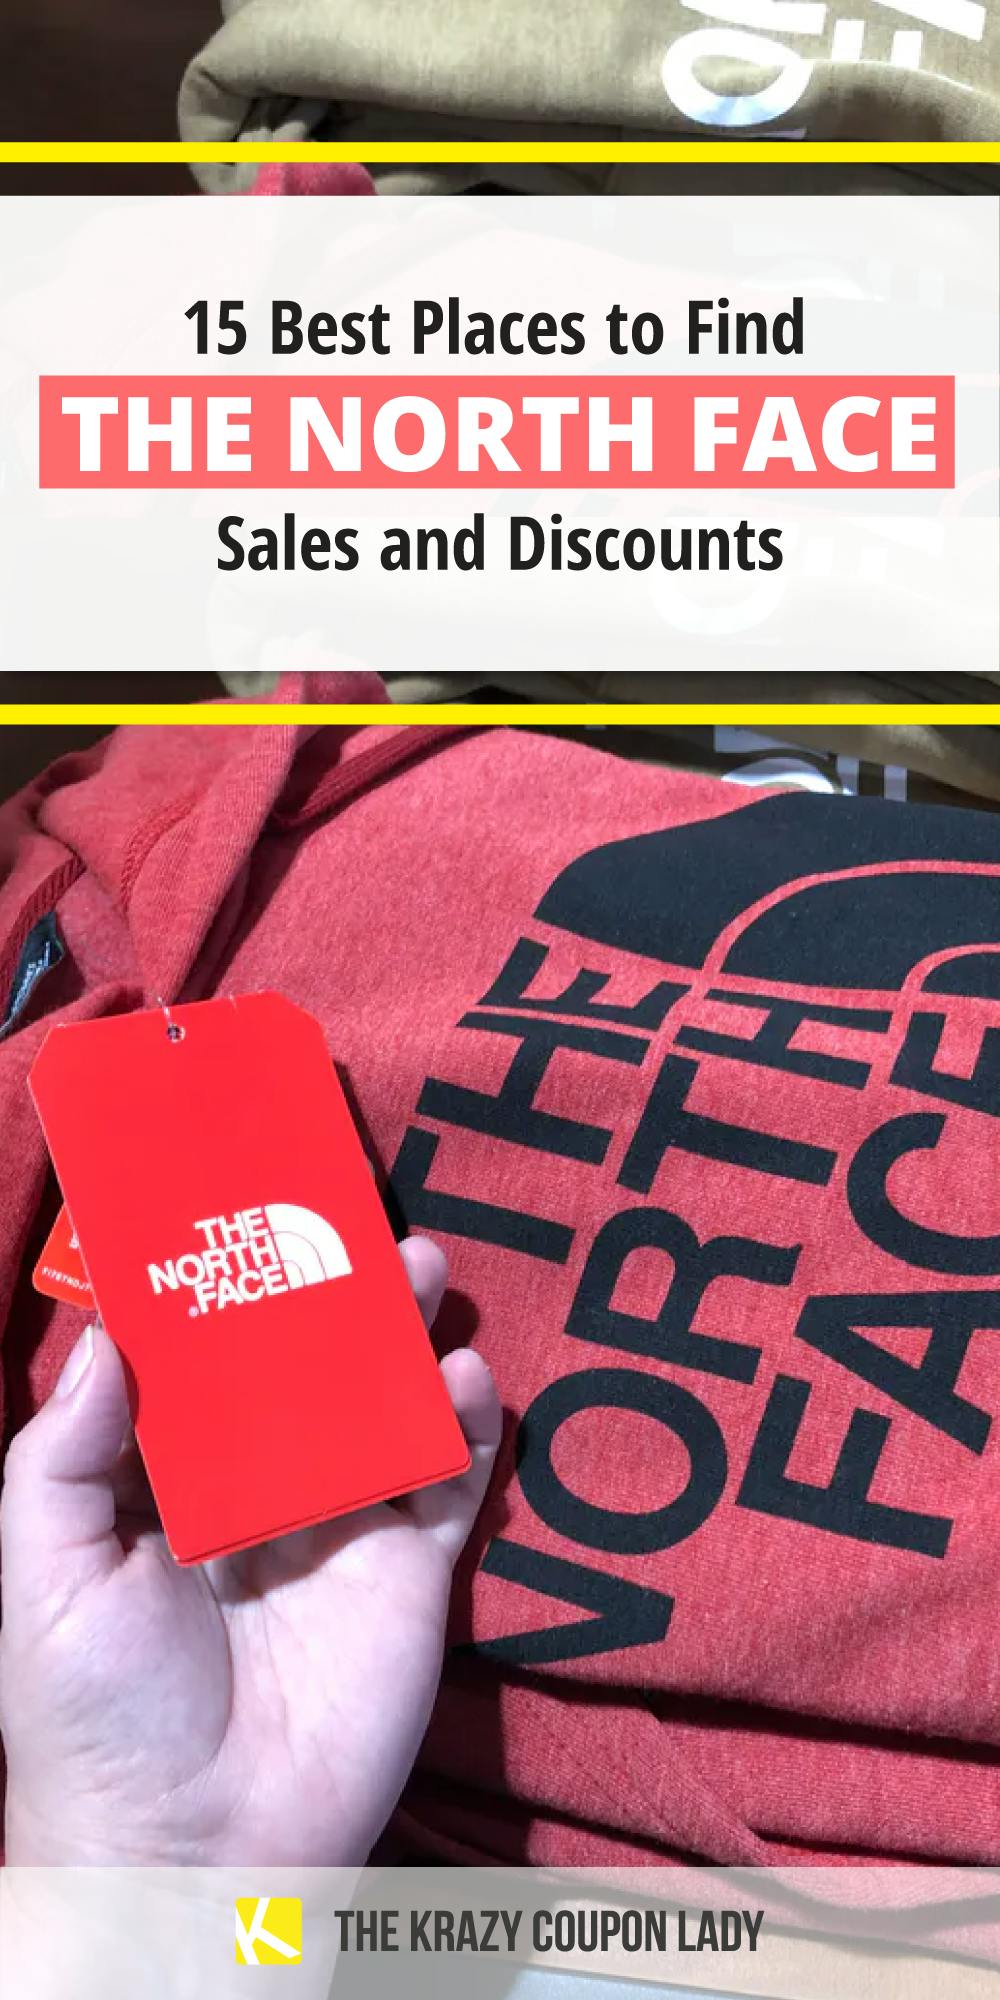 15 Best Places to Find The North Face Sales and Discounts The Krazy